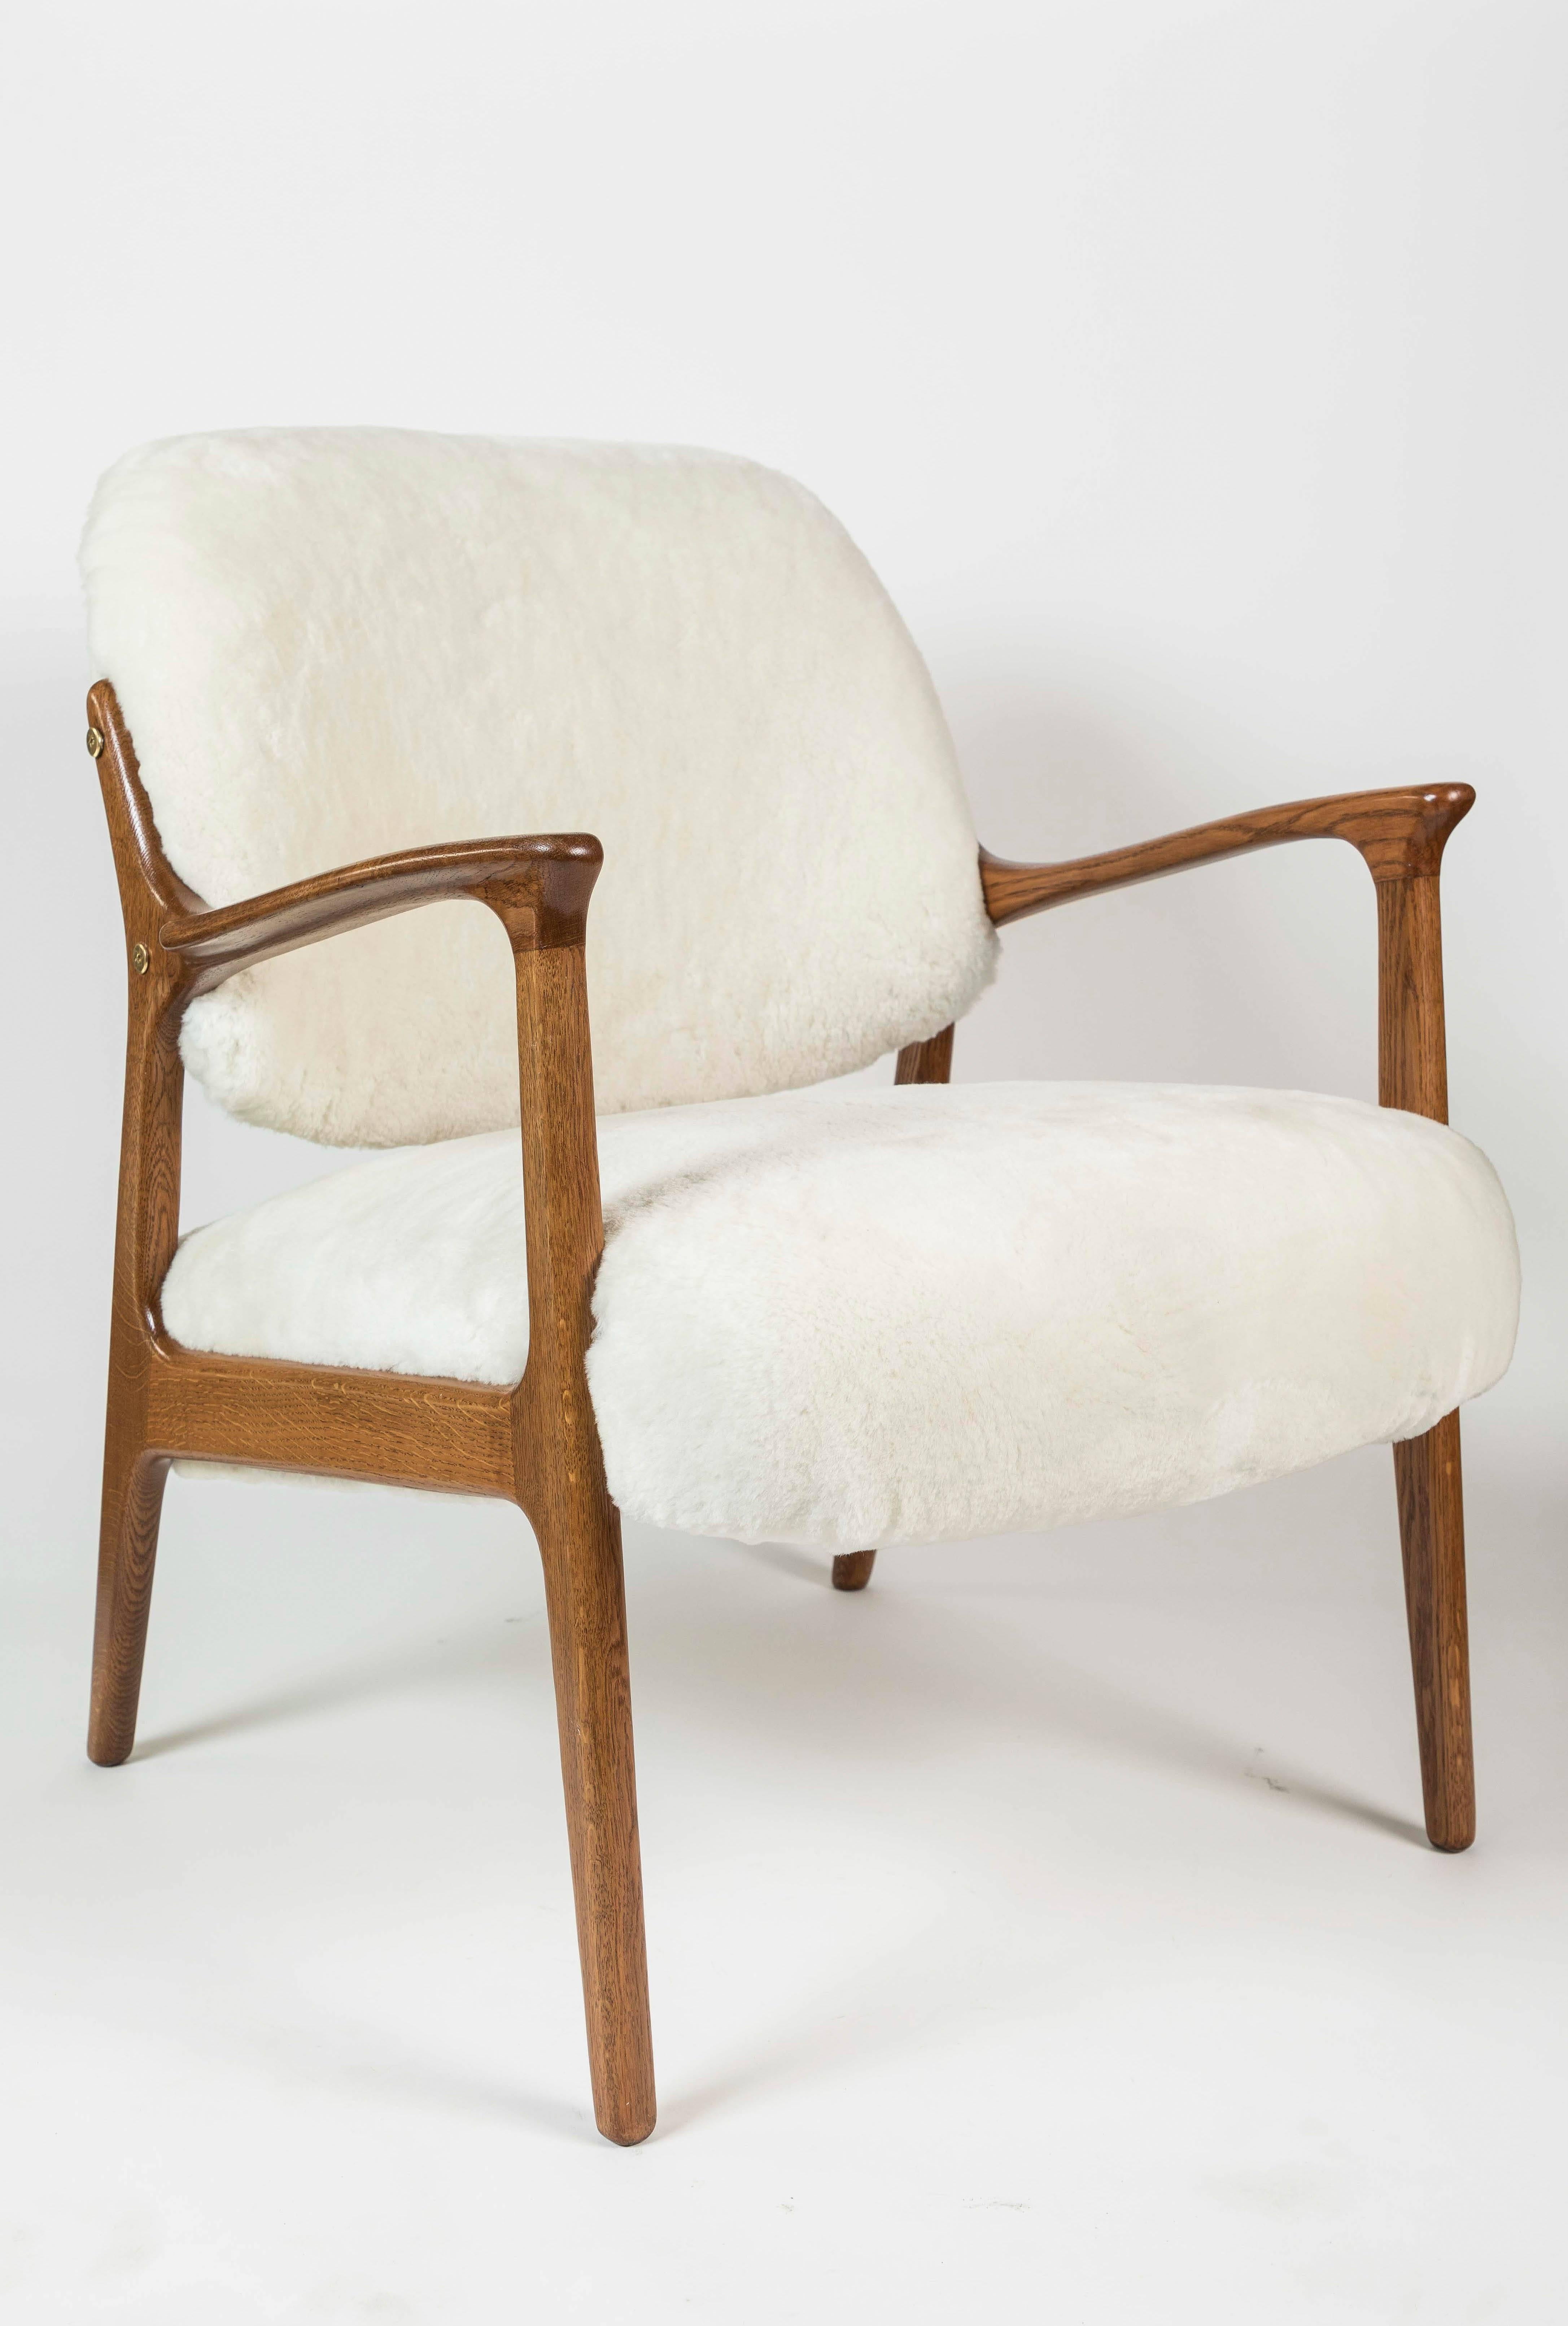 Pair of newly refinished midcentury teak framed arm chairs that are newly upholstered in white shearling.

Measure: arm height 23.5".